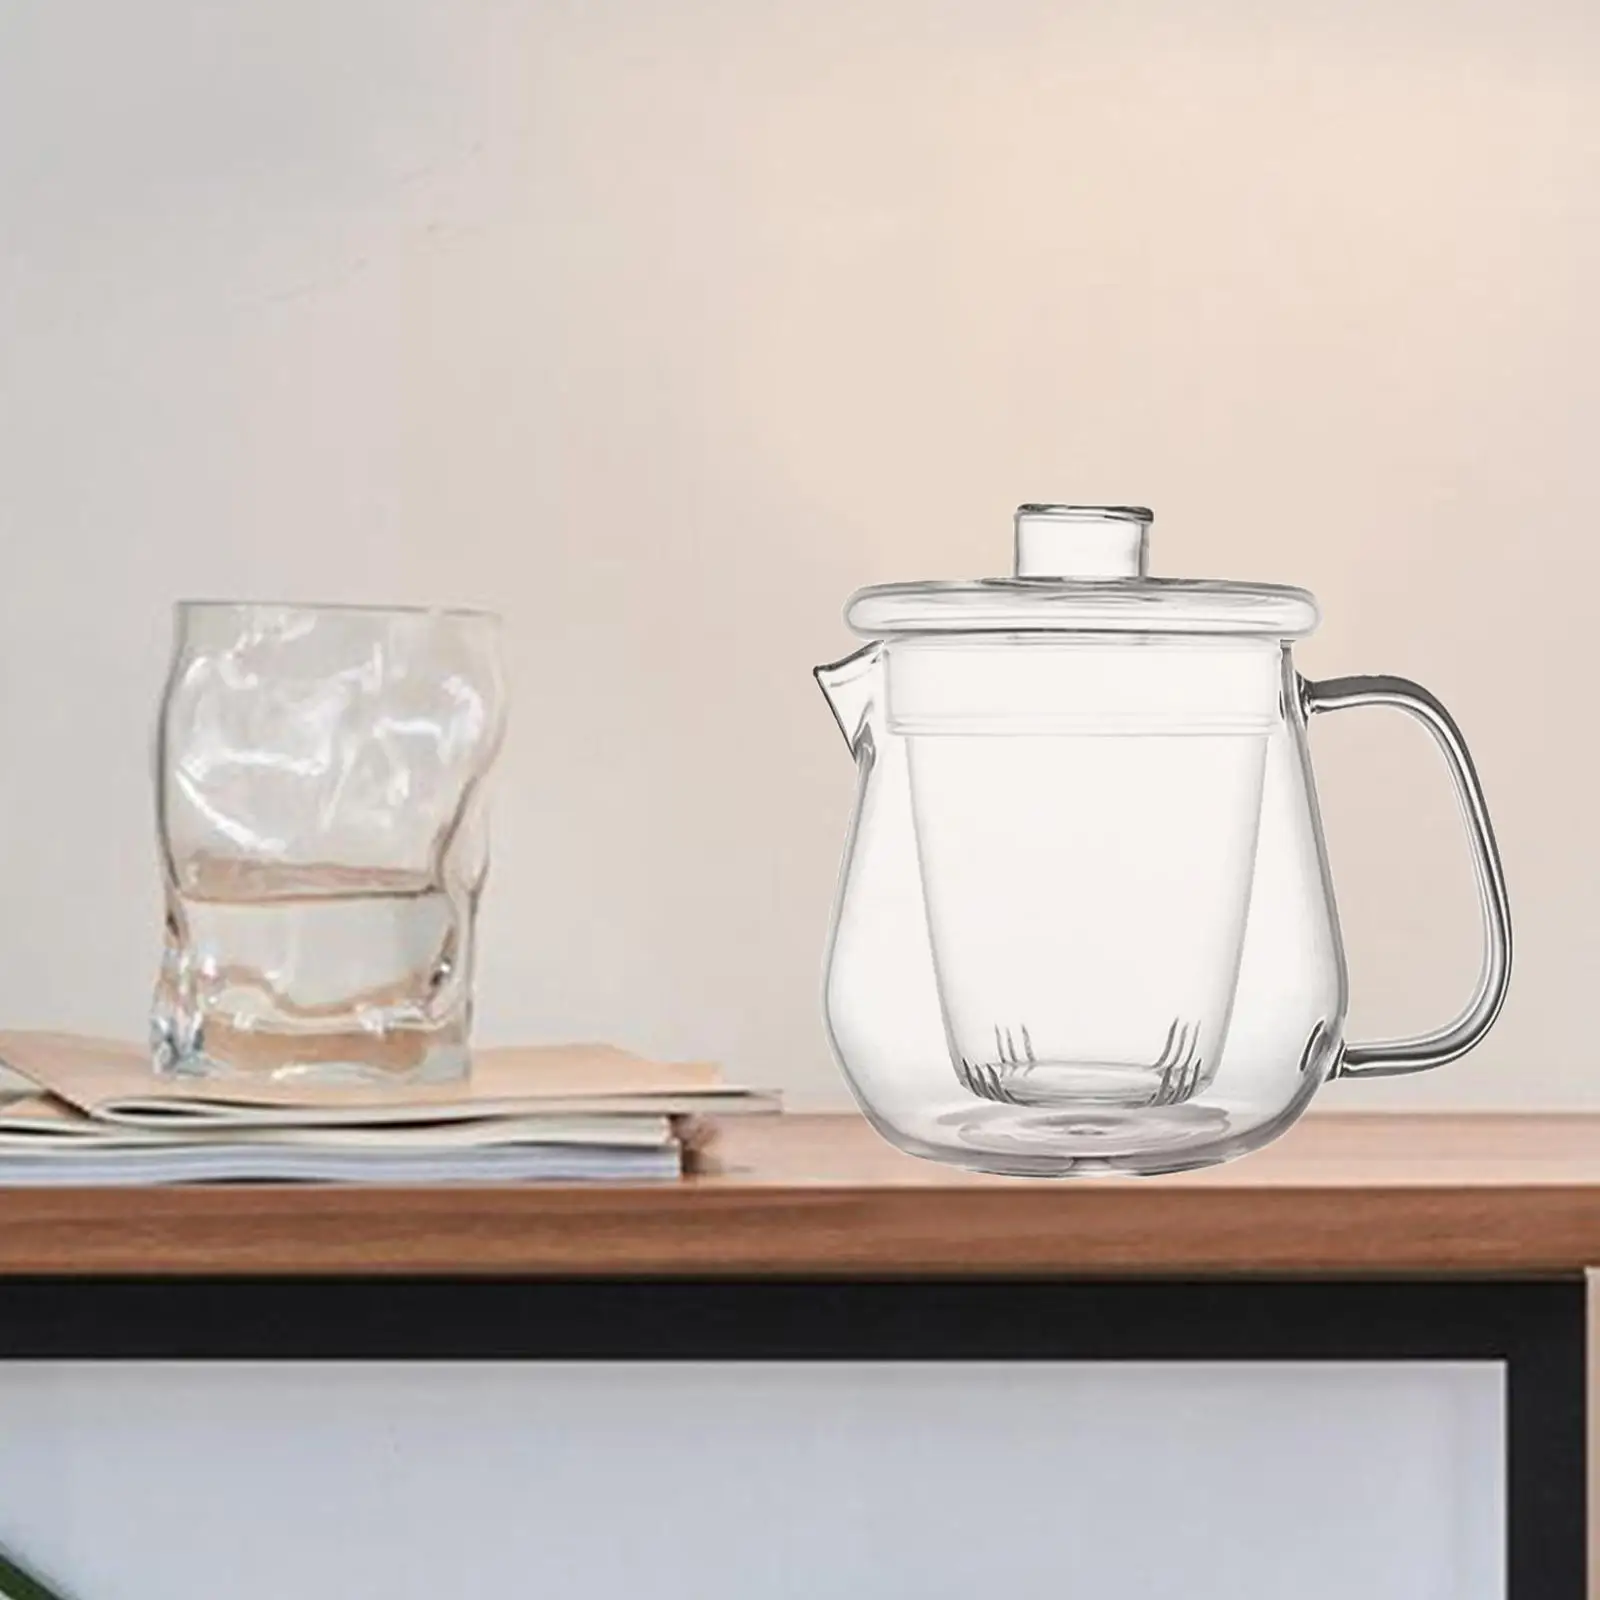 750ml Teapot with Removable Infuser Blooming Tea Maker Iced Tea Pitcher for  Juice Milk Coffee Loose Leaf Tea Maker